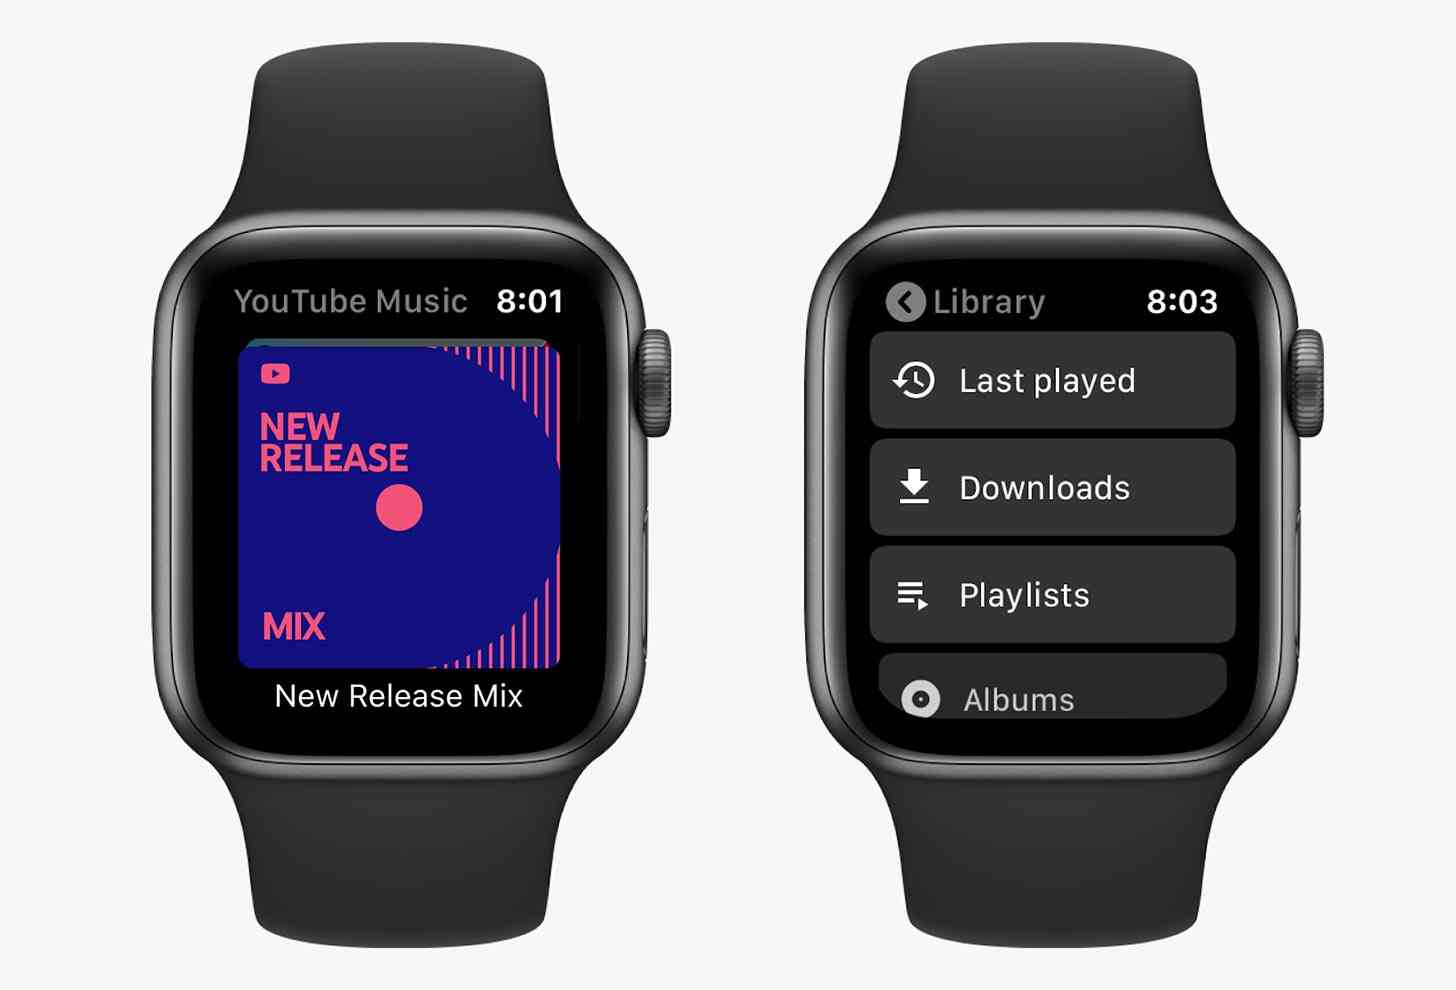 YouTube Music Apple Watch features